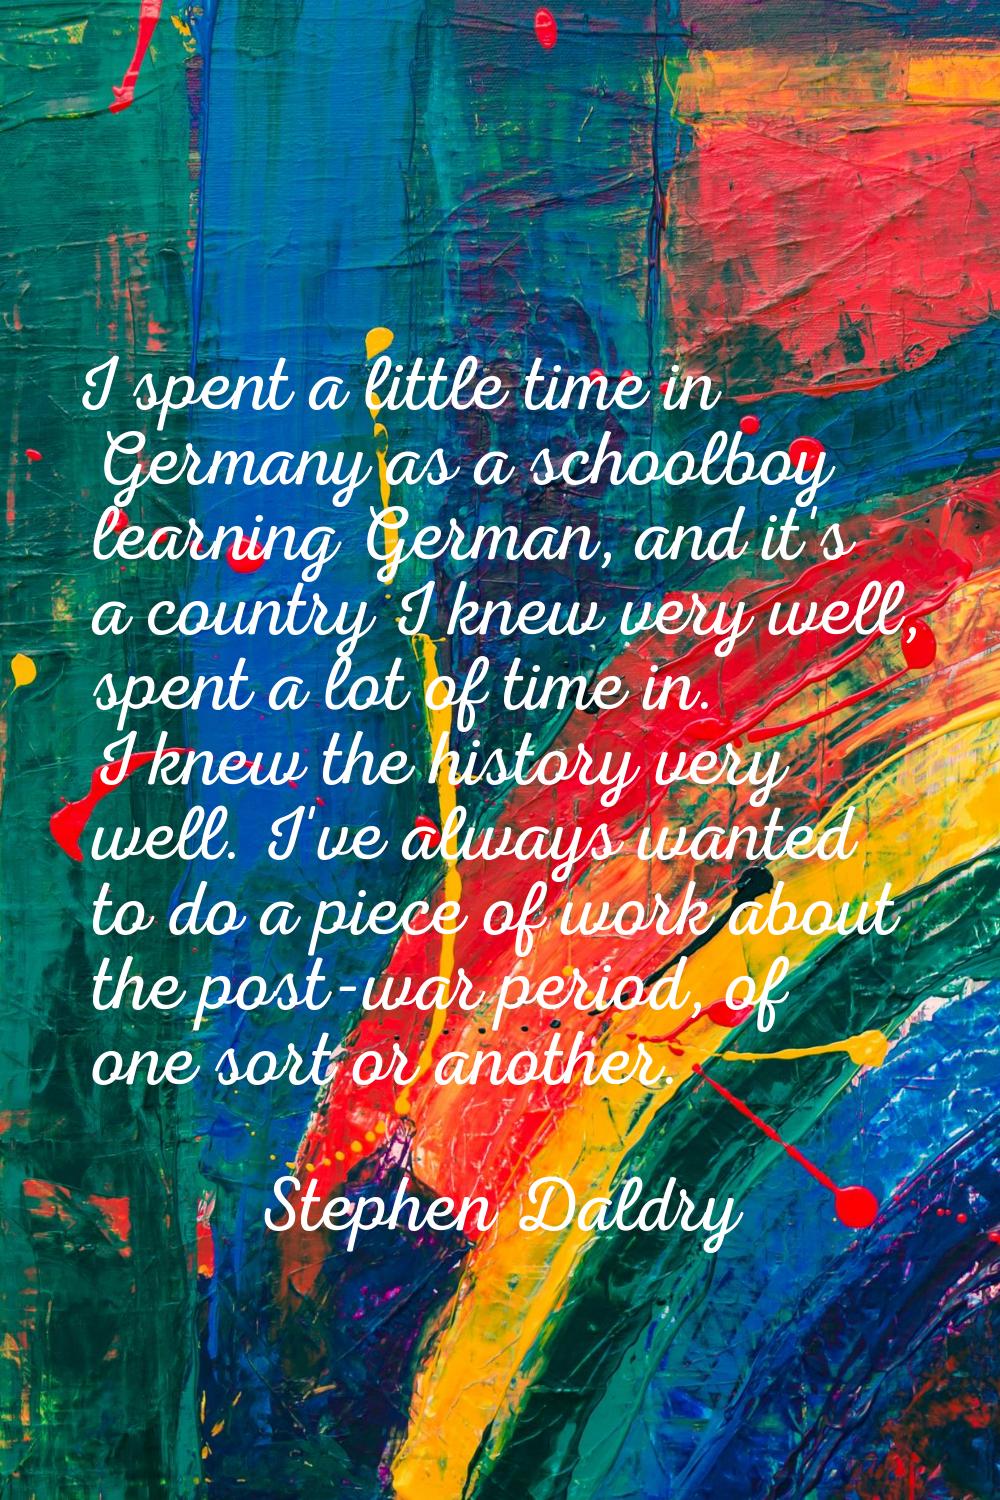 I spent a little time in Germany as a schoolboy learning German, and it's a country I knew very wel